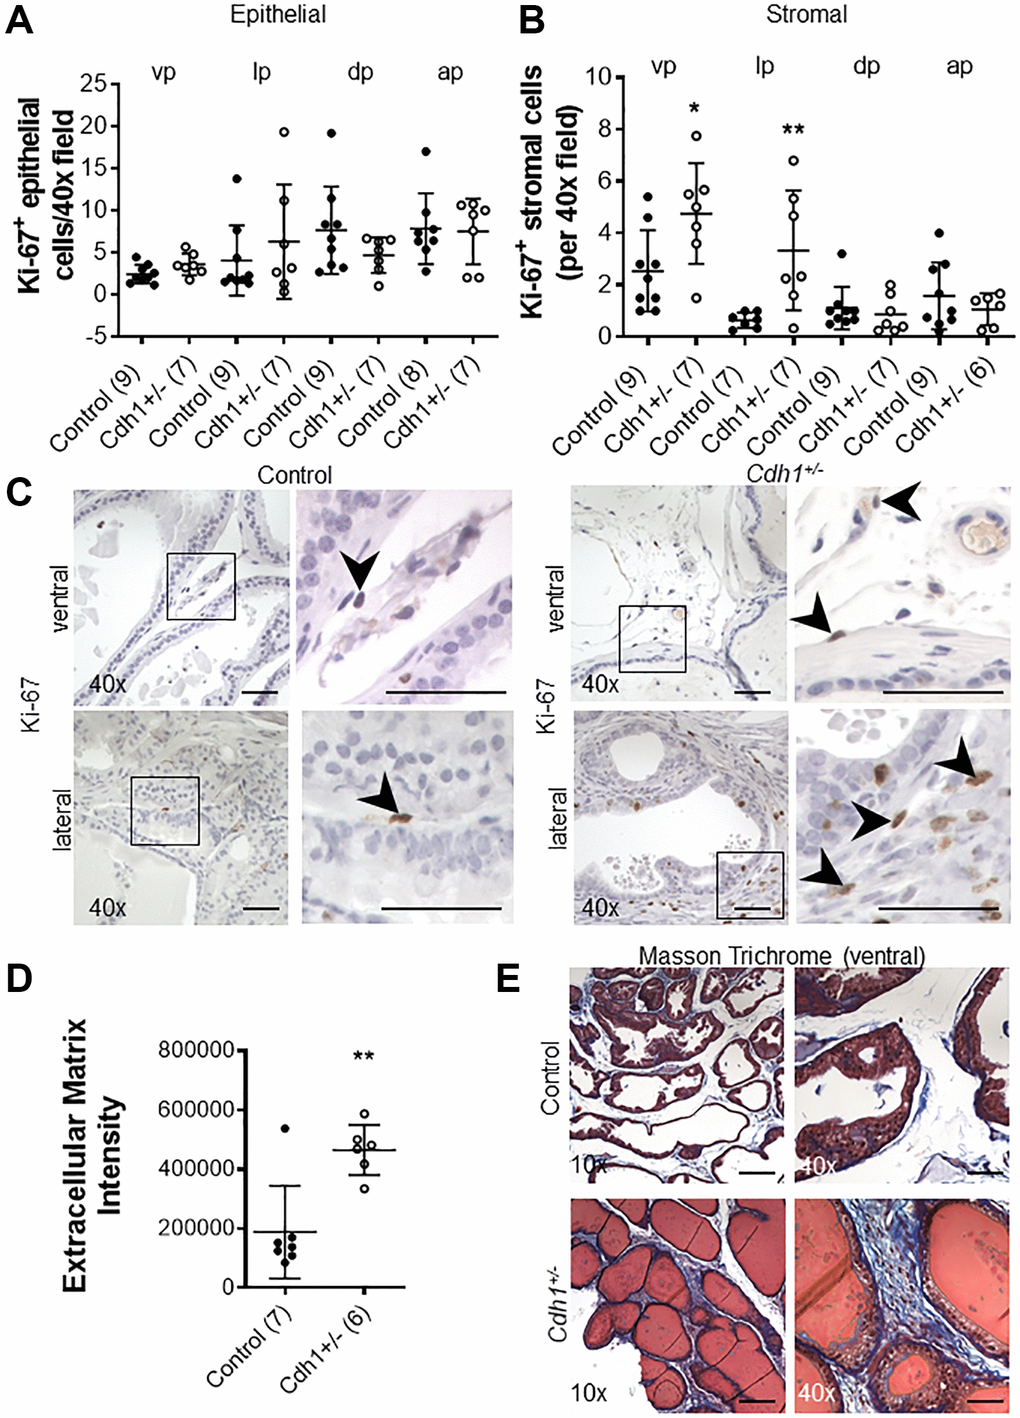 Impact of prostate epithelial specific heterozygous E-cadherin loss on proliferation and extracellular matrix deposition in the murine prostate at 24 months of age. (A) Quantification of Ki-67+ epithelial, and (B) stromal cells in the lobes of the prostate from Control and Cdh1+/- mice at 24 months of age. Abbreviations: vp: ventral prostate; lp: lateral prostate; dp: dorsal prostate; ap: anterior prostate. (C) Ki-67 immunostaining (brown) in the stromal compartments of prostate ventral and lateral lobes. Black arrows indicate Ki-67+ cells in the stromal compartment. Original magnification, 40×, inset 40×. (D) Quantification of Masson’s trichrome staining of extracellular matrix (blue) in the stroma surrounding prostate glands from ventral prostate of Control and Cdh1+/- mice at 24 months of age. Seven fields from each section were analyzed and an average score was determined for each mouse. (E) Masson’s trichrome staining in transverse sections of prostate ventral lobes in Control (top panels) and Cdh1+/- mice (bottom panels). Original magnification, 10×, inset 40×. Data represent mean ± S.D, number of mice in each group in parentheses. Lobes which had been washed away during staining process were not quantified. *p **p D) Scale bars indicate 200 μm in 10×, 50 μm 40×.